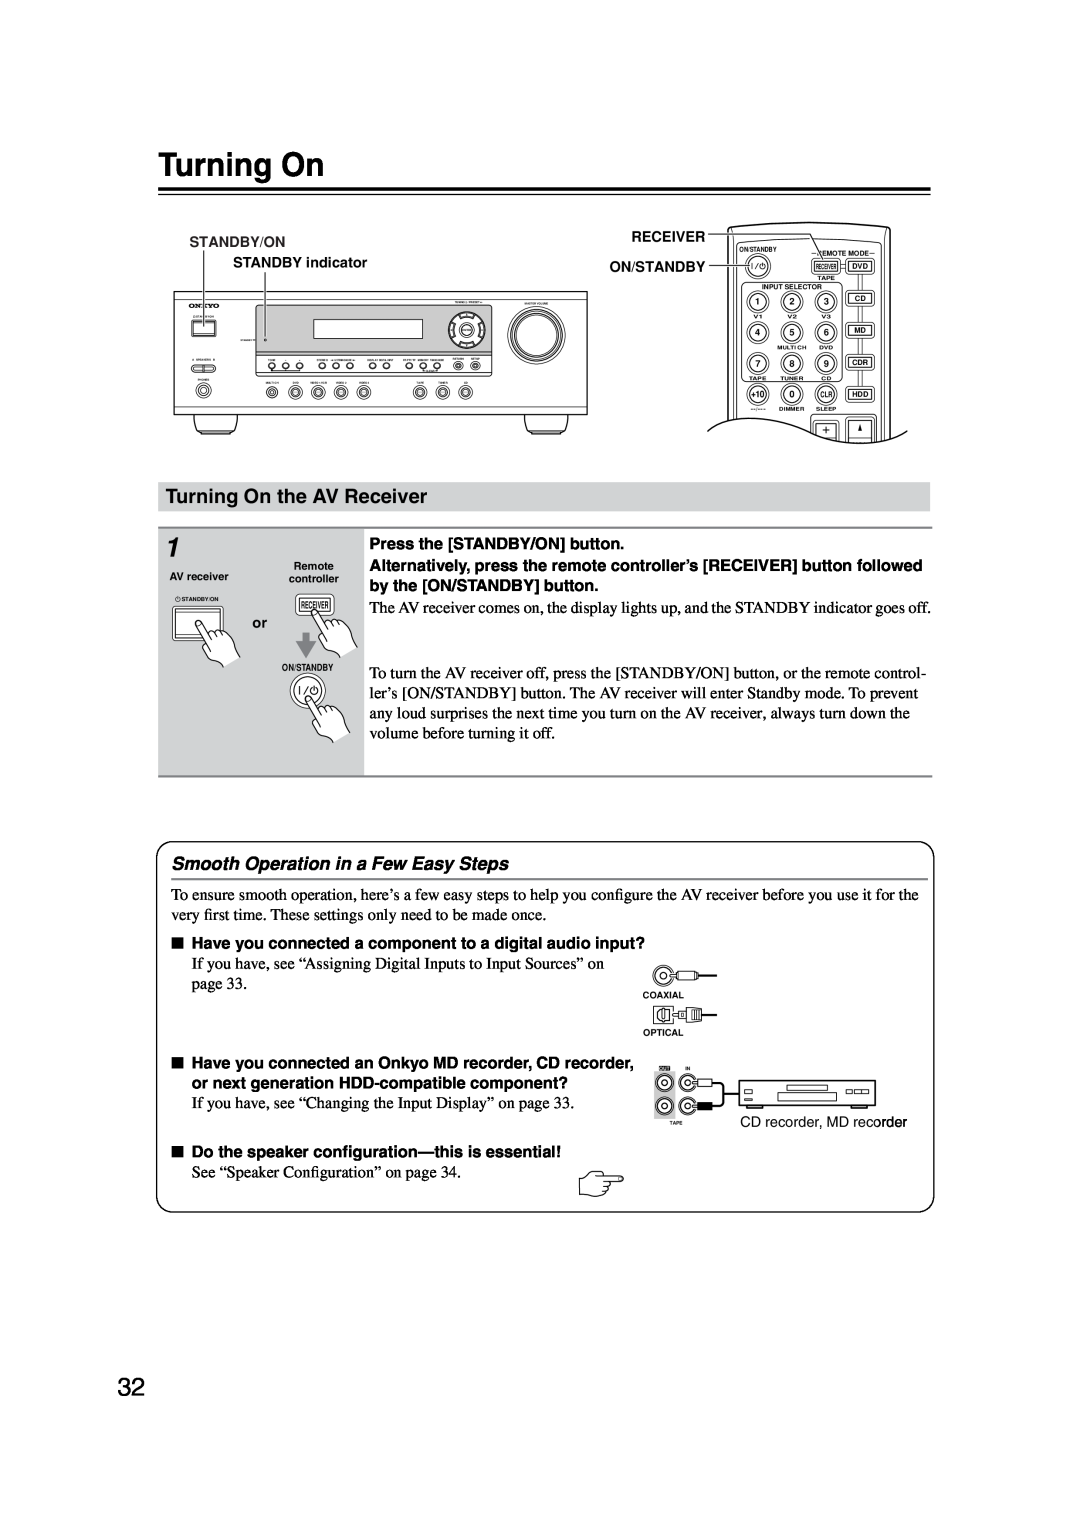 Onkyo TX-SR304 instruction manual Turning On the AV Receiver, Smooth Operation in a Few Easy Steps 